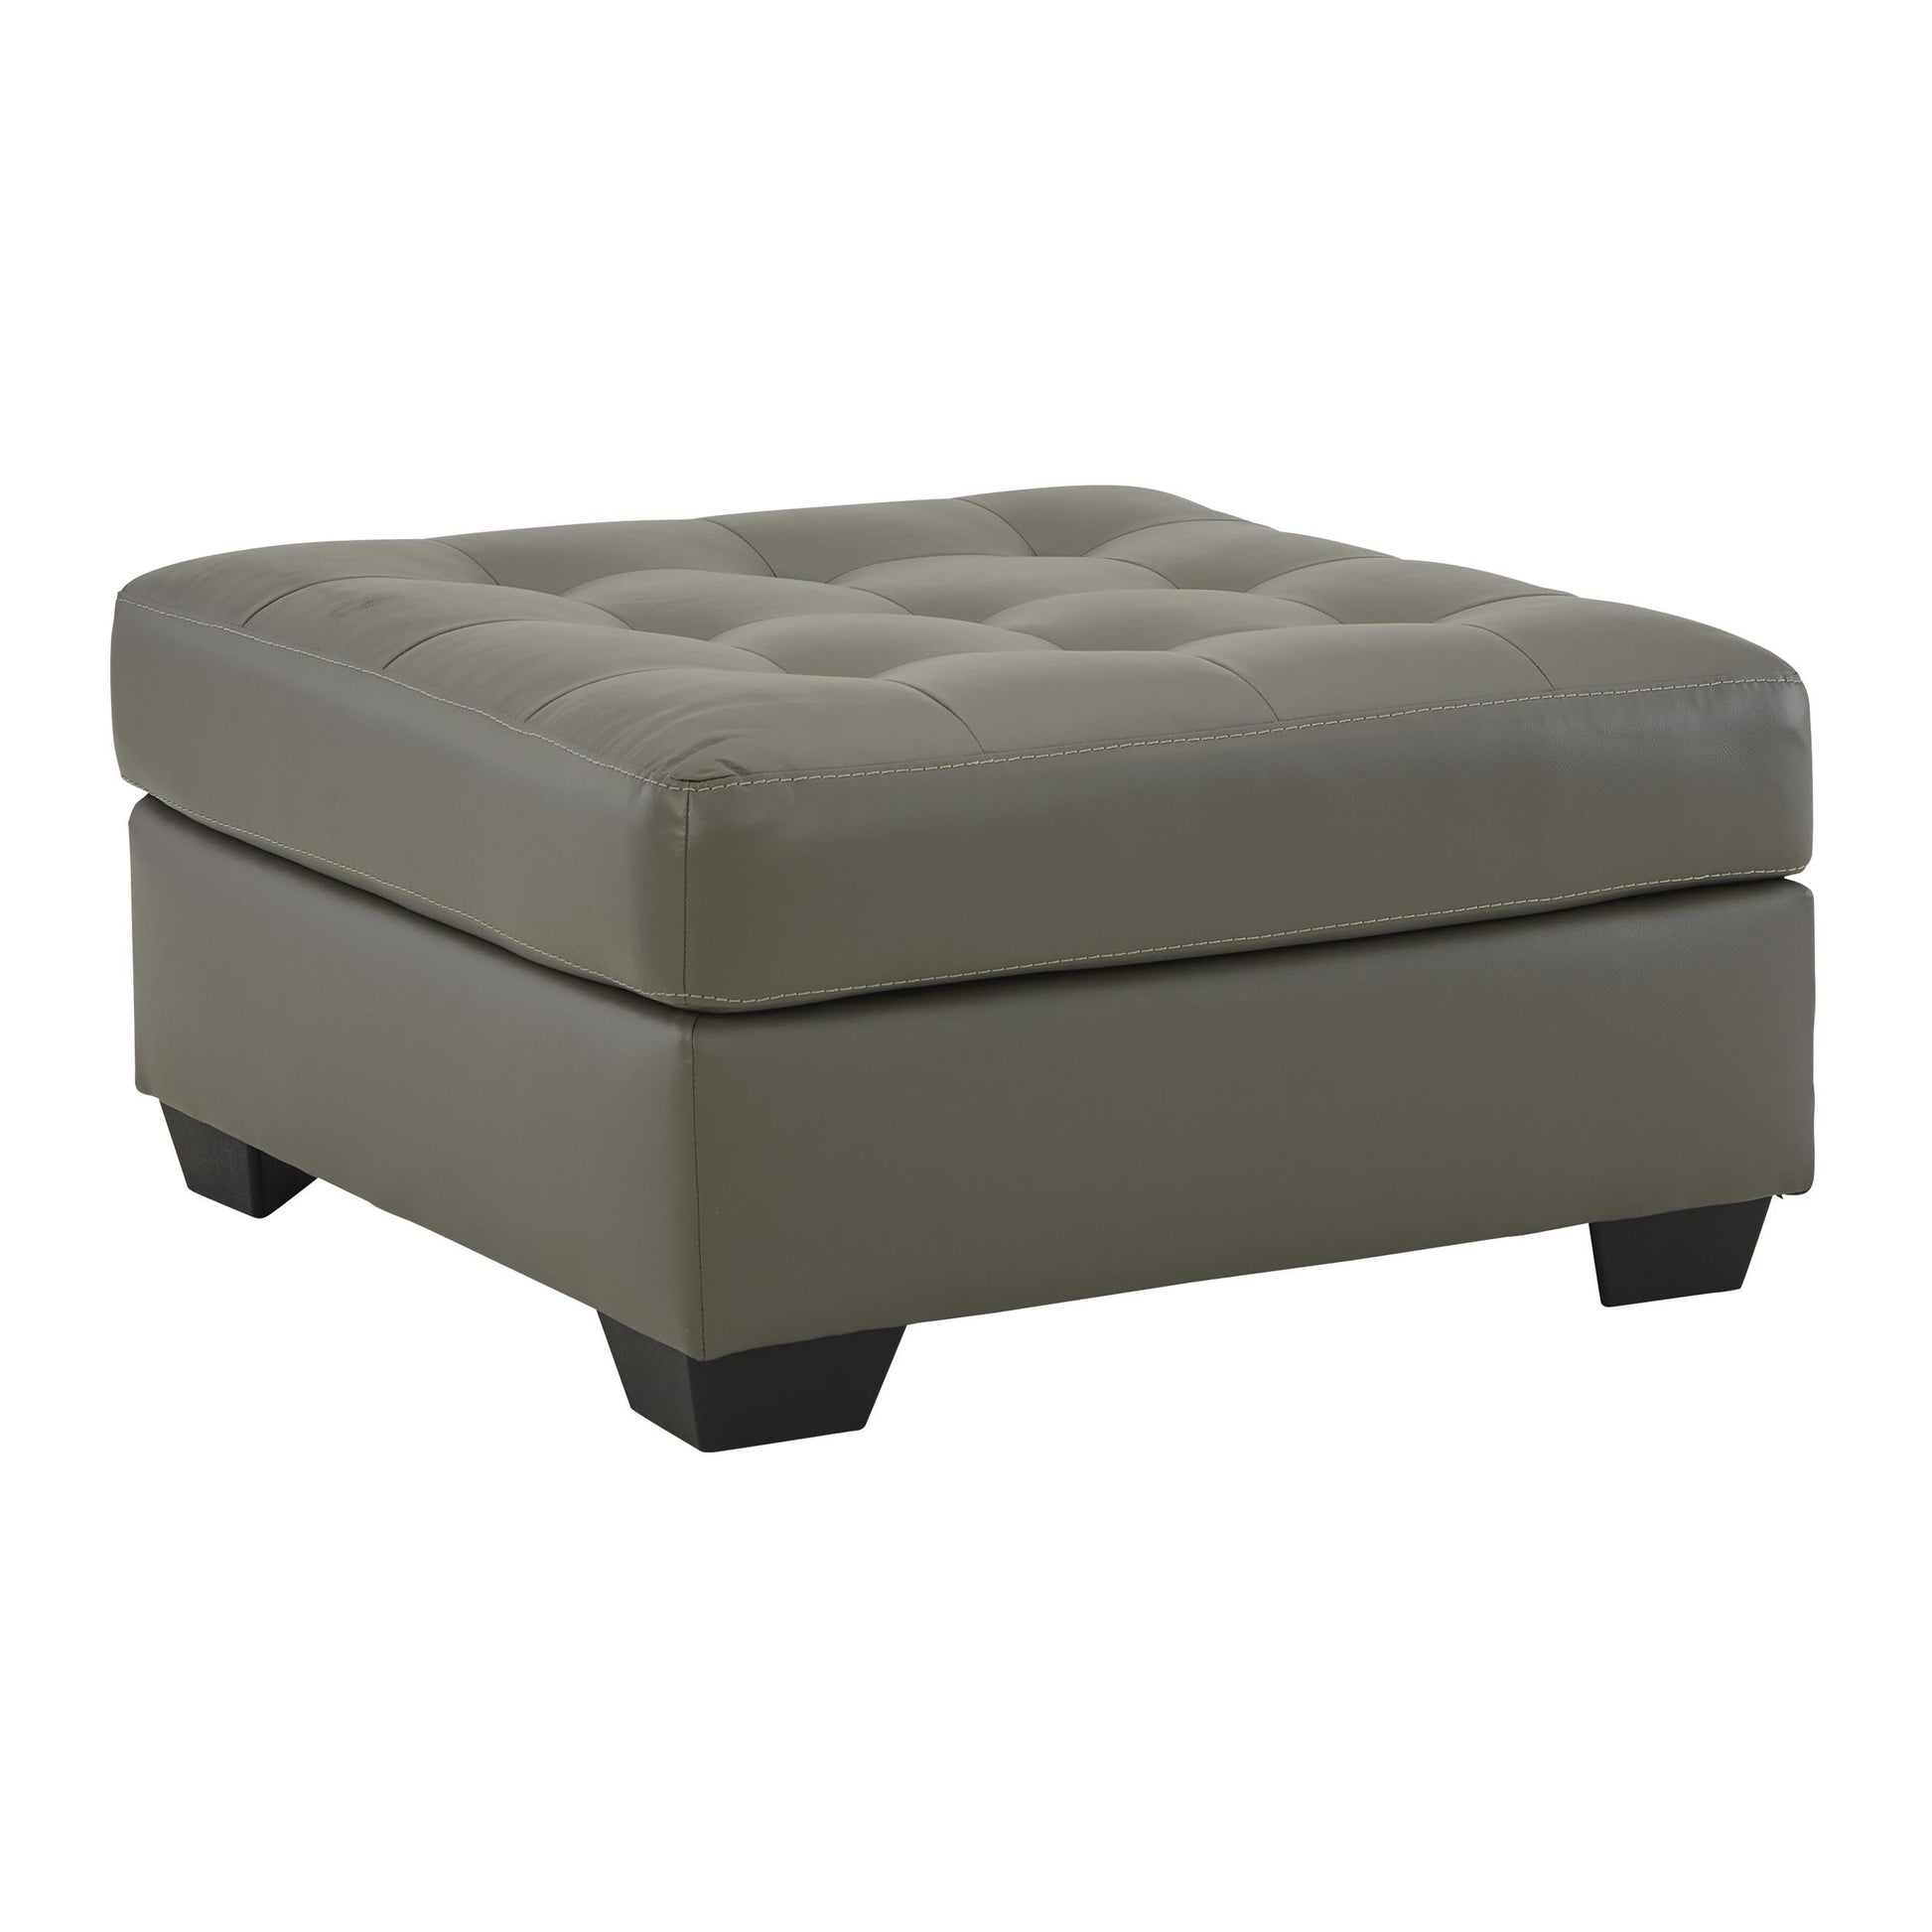 Signature Design by Ashley Donlen Leather Look Ottoman 5970208 IMAGE 1